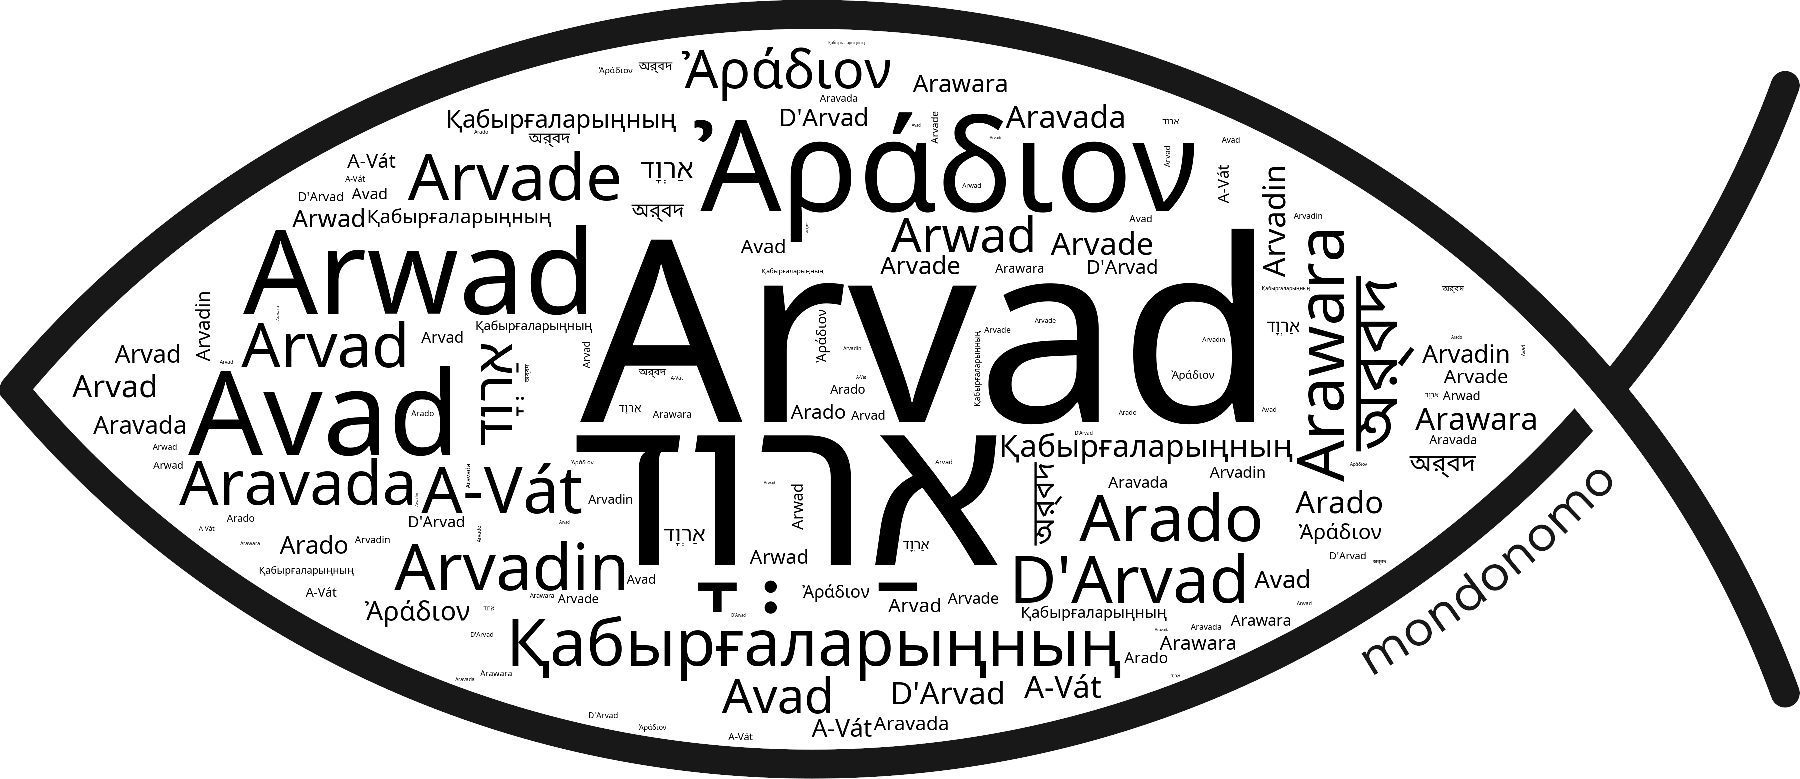 Name Arvad in the world's Bibles